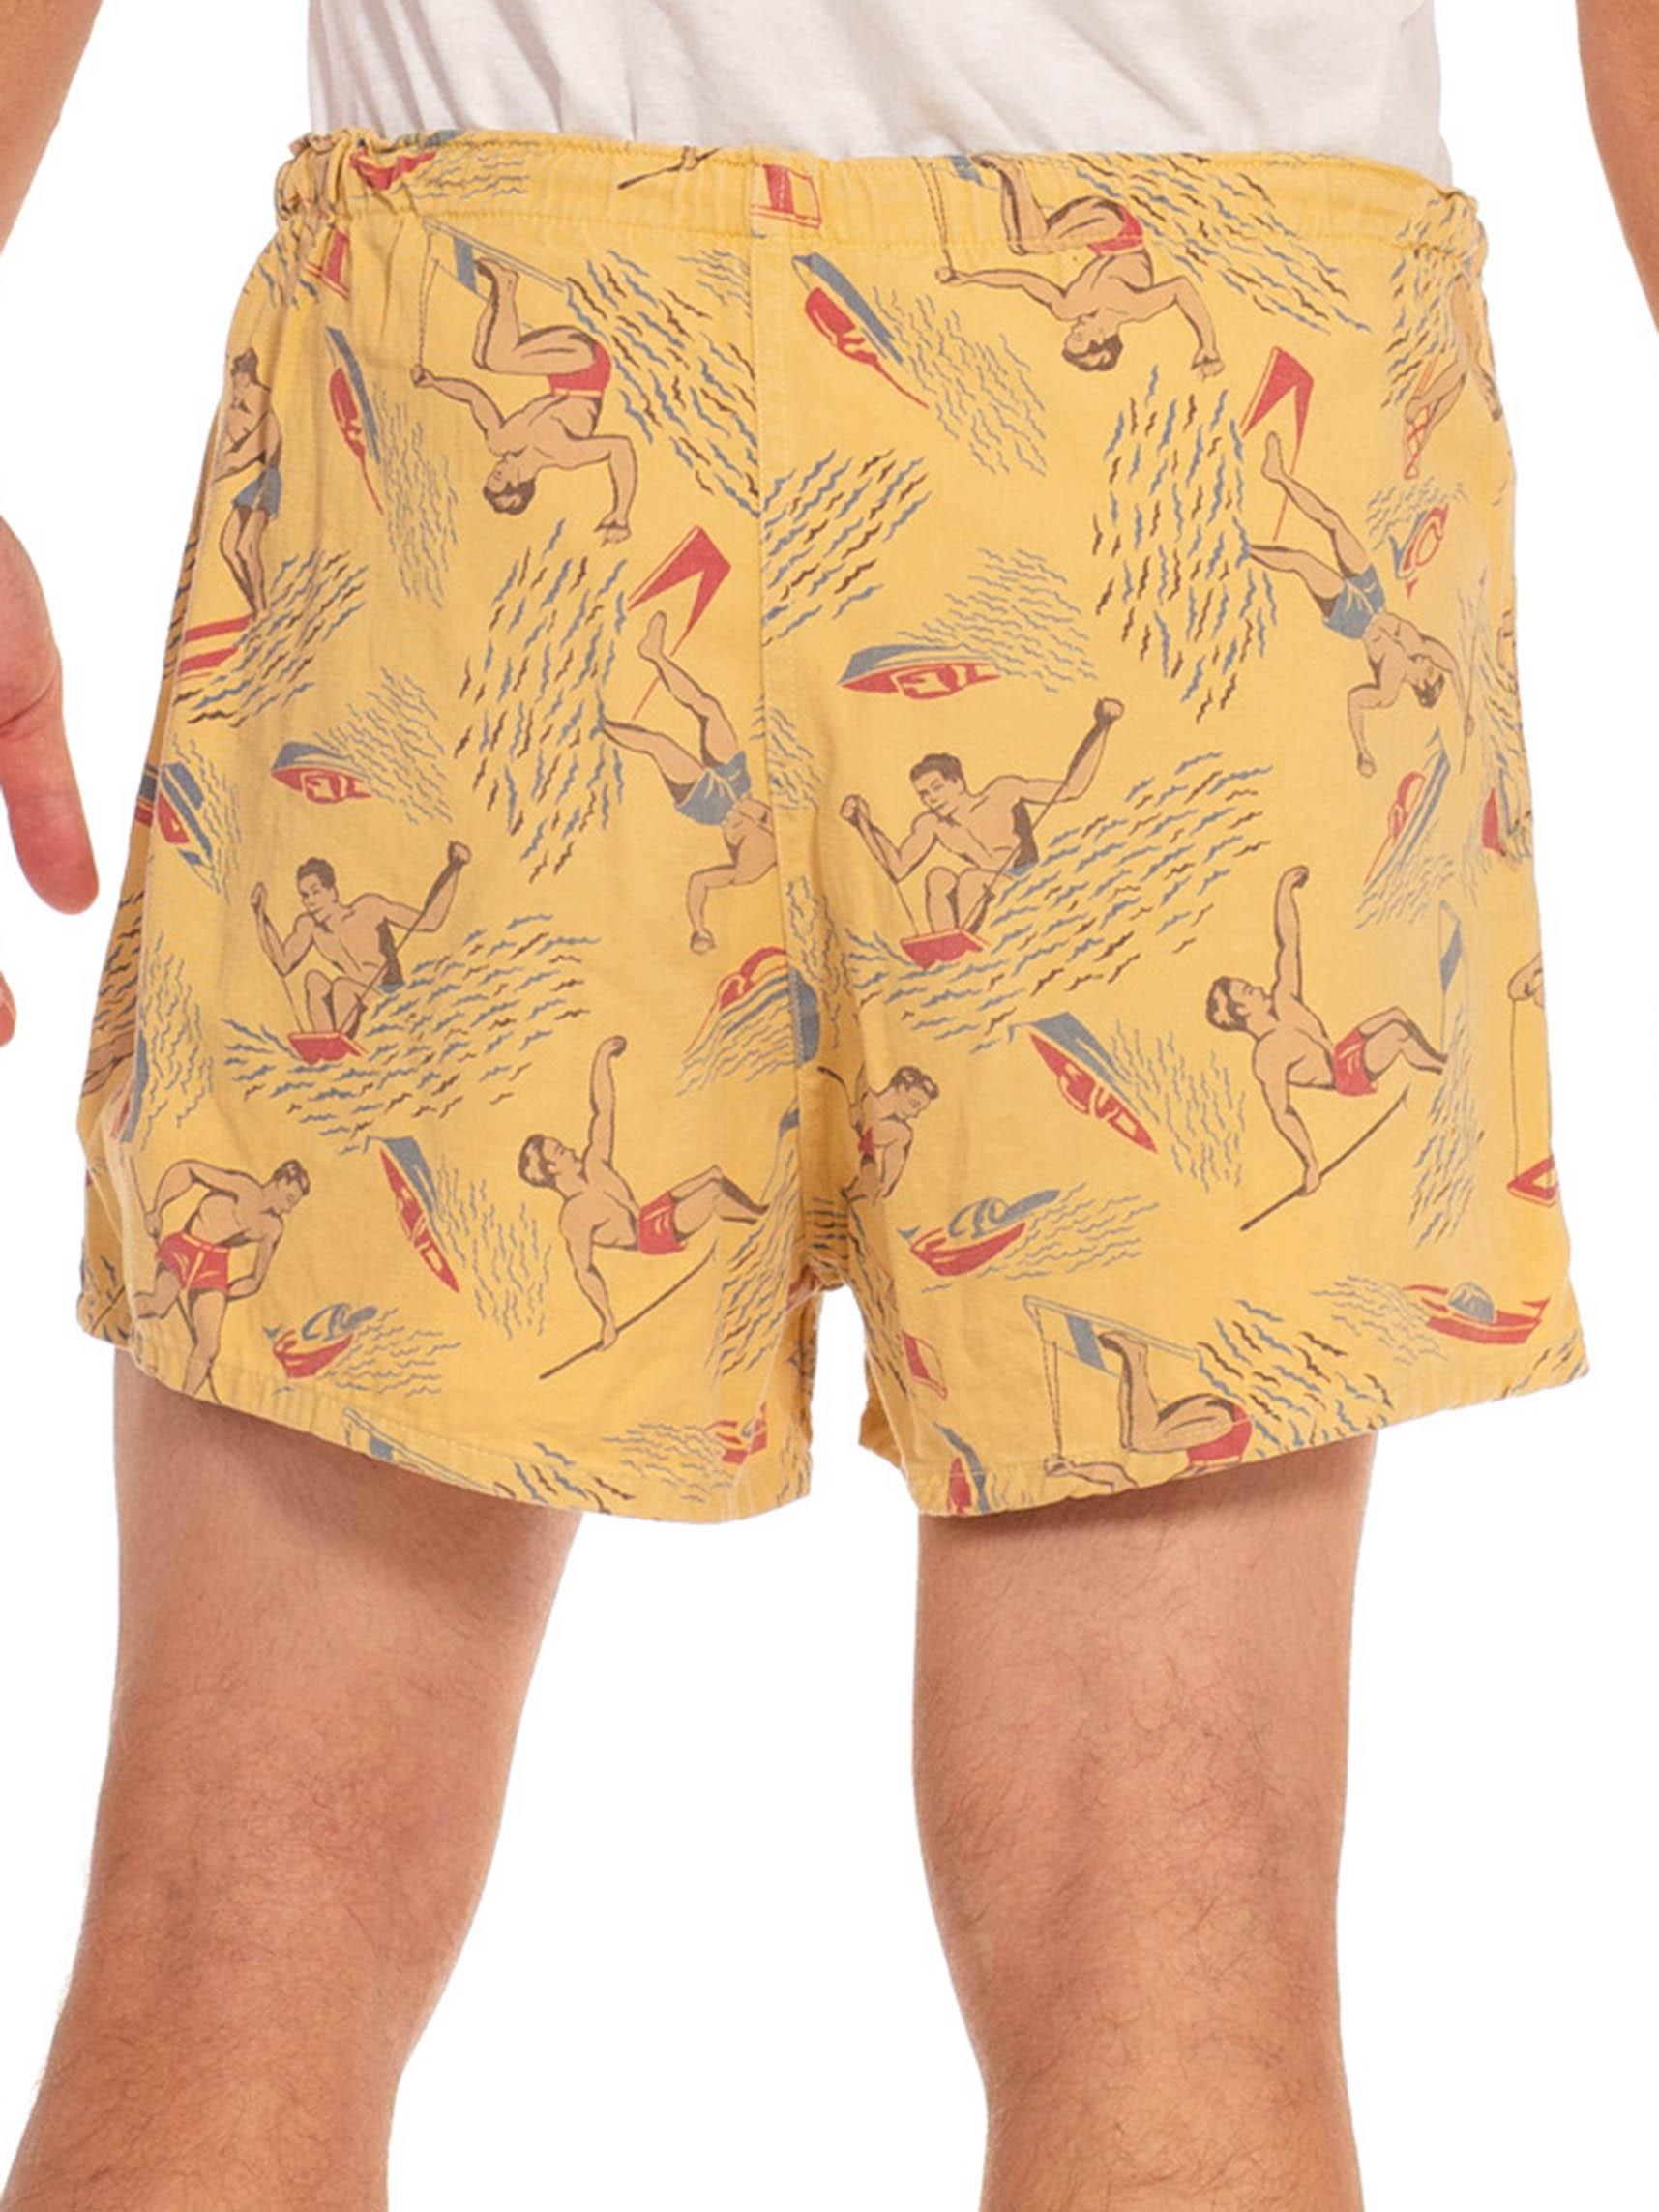 Women's or Men's 1940S Butter Yellow & Red Cotton Men Surfing Printed Shorts For Sale